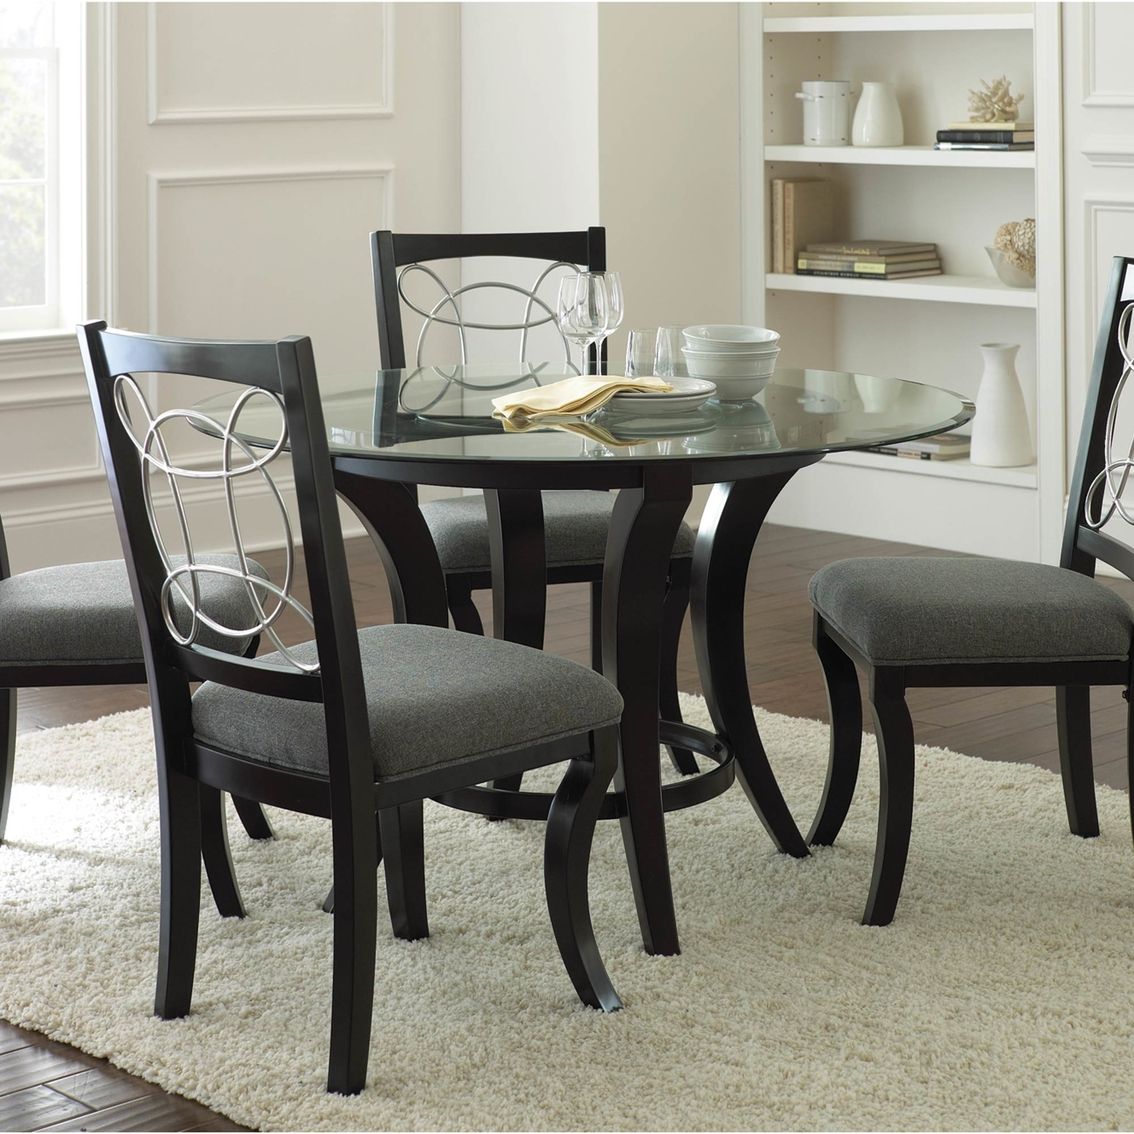 Steve Silver Cayman Tempered Glass Dining Table With Faux With Most Up To Date Silver Dining Tables (View 10 of 15)